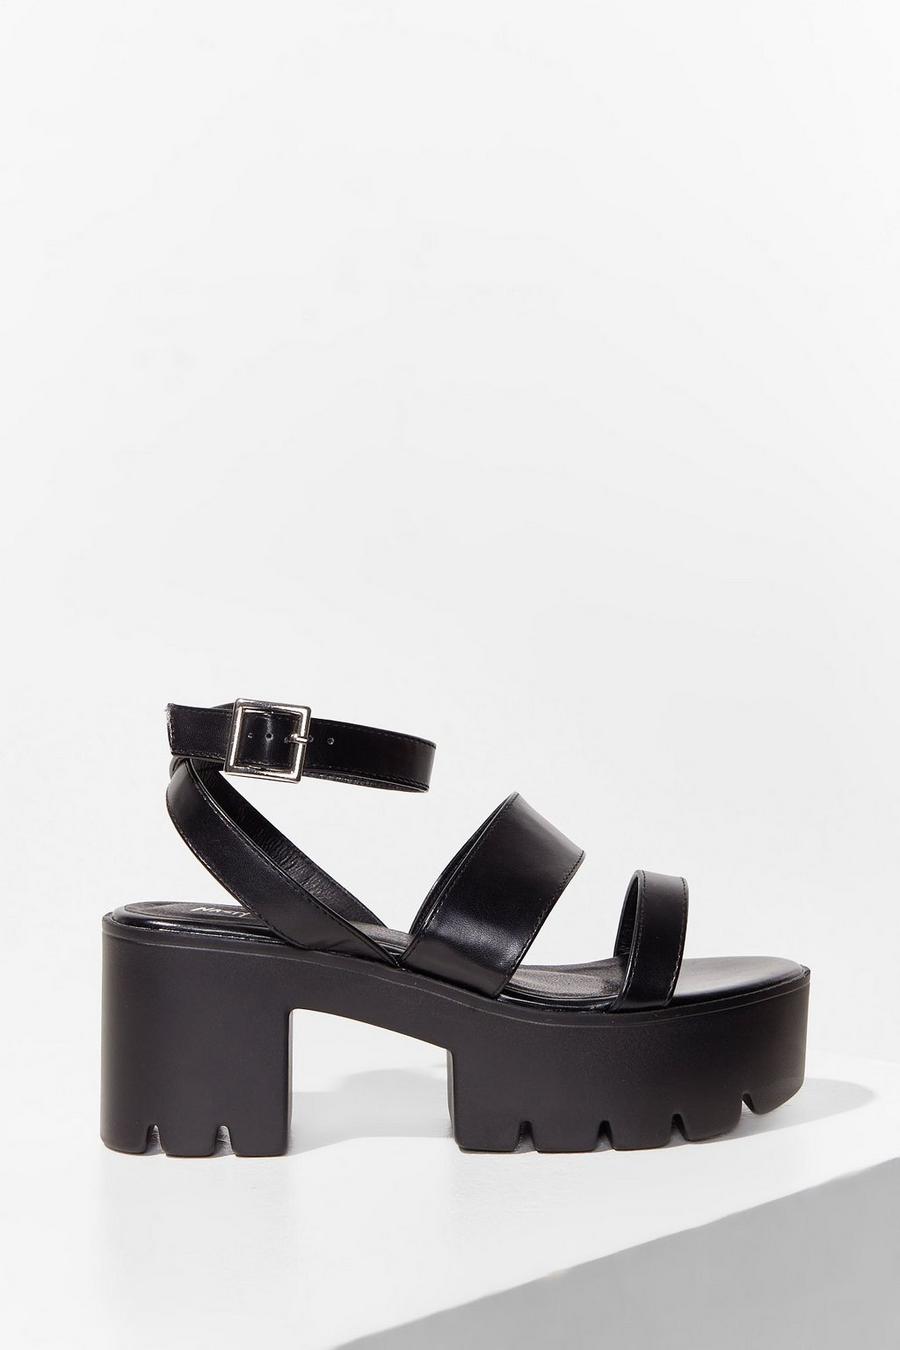 In the Driving Cleat Strappy Platform Sandals